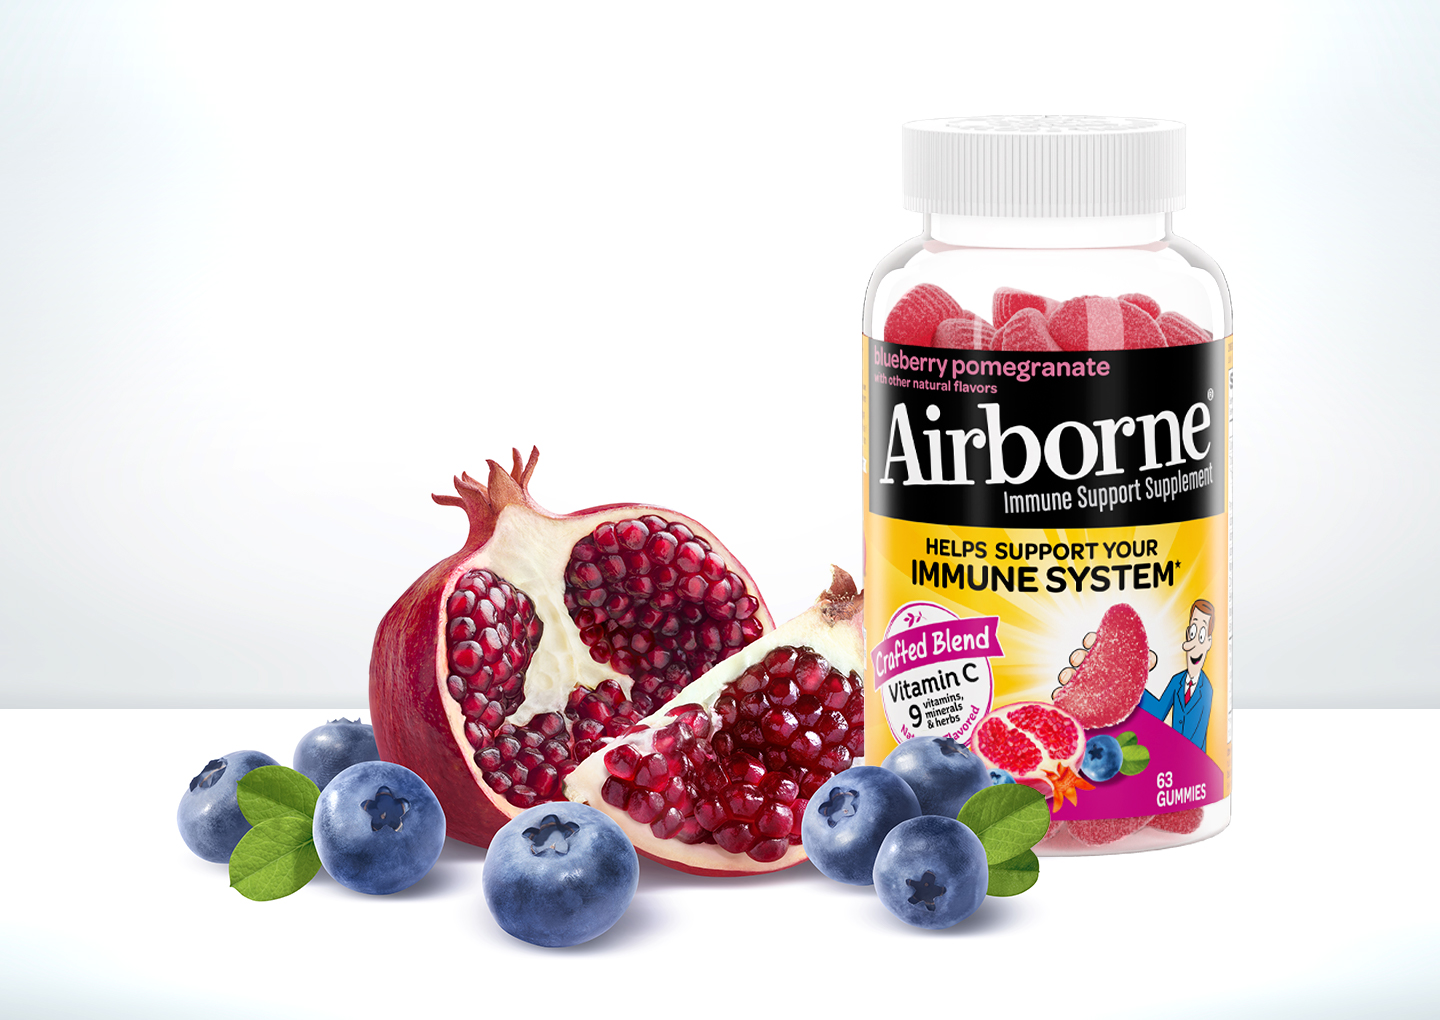 Easy-to-take & bursting with Blueberry Pomegranate flavor